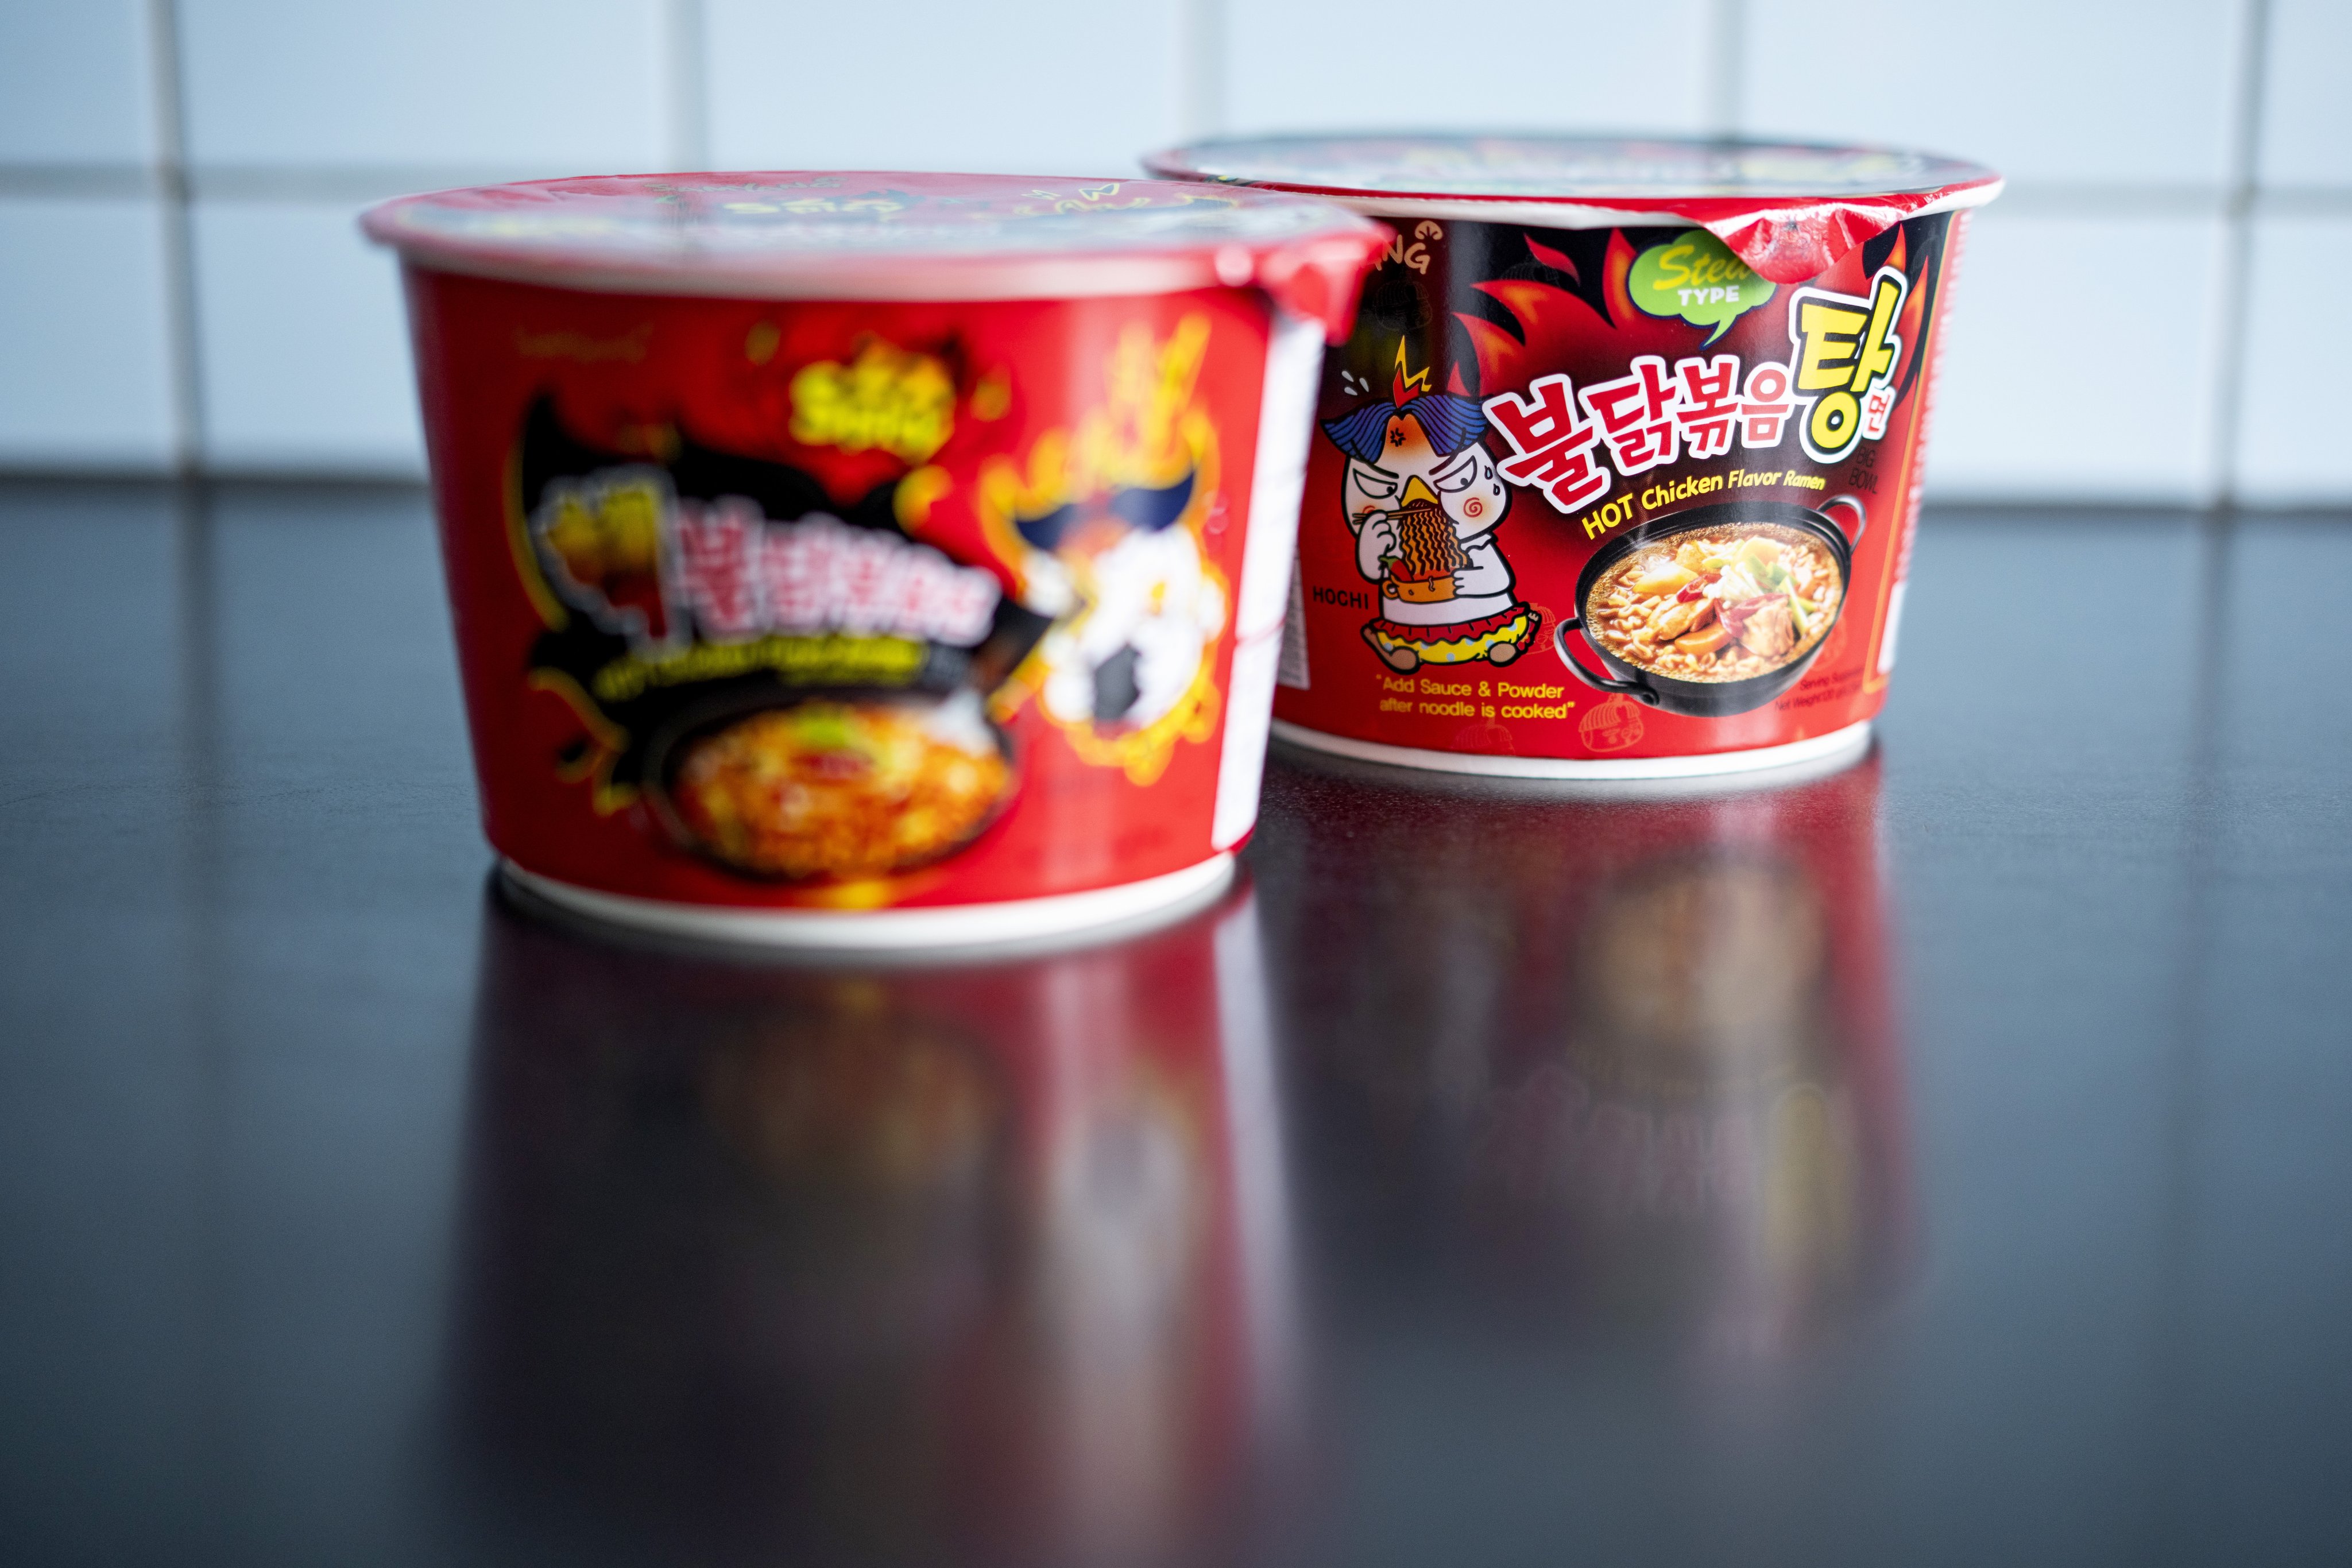 The Danish Veterinary and Food Administration has recalled several noodle products as they believe they are harmful to health. Photo: EPA-EFE